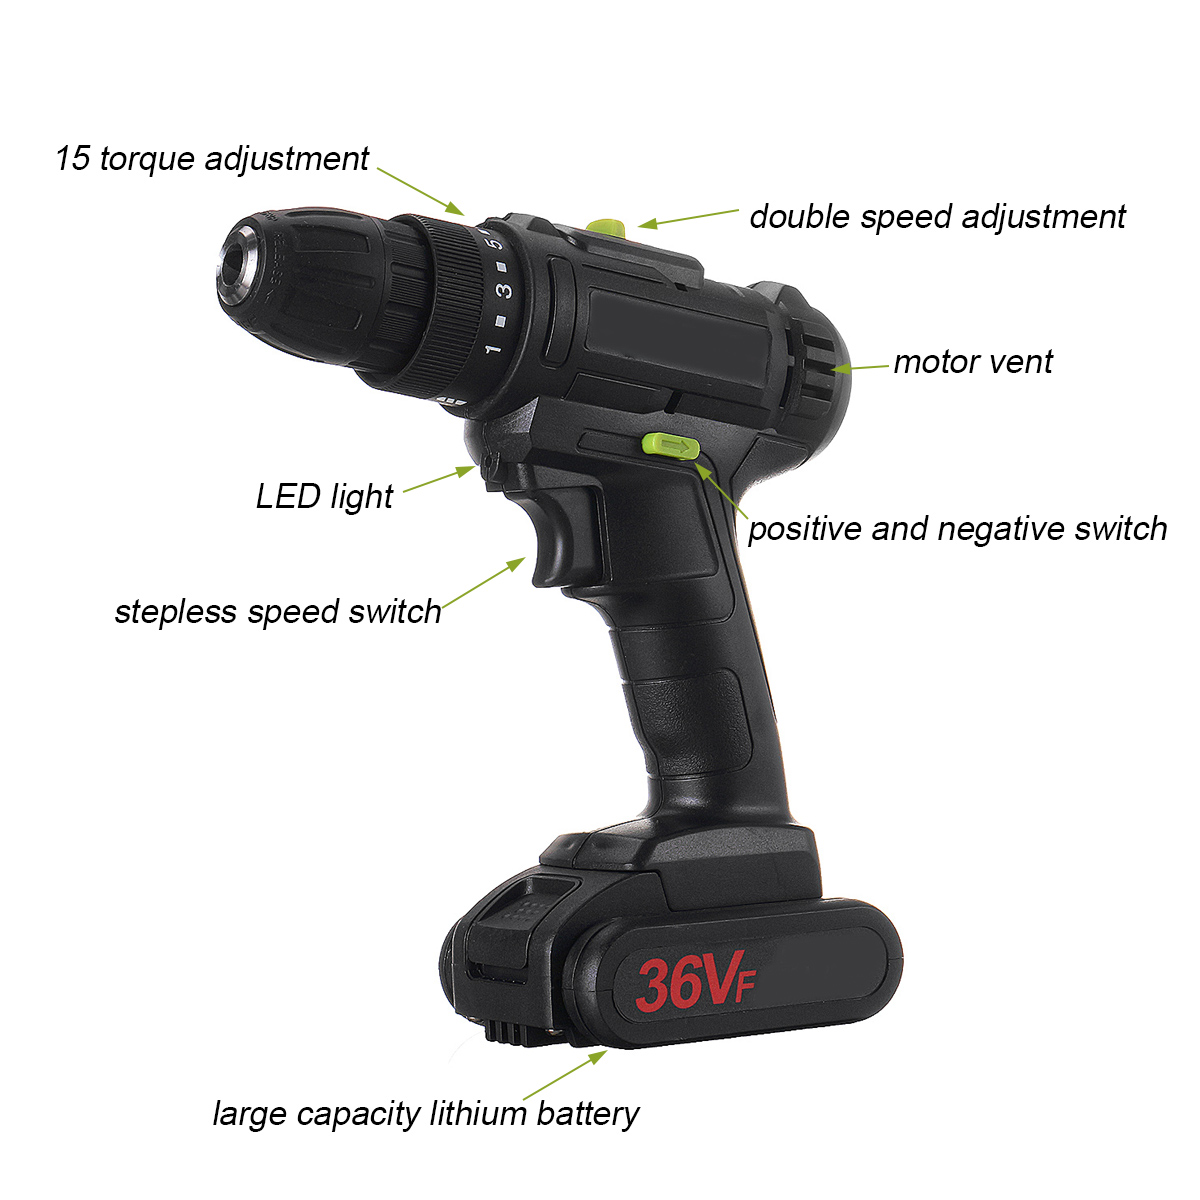 21V-1500mAH-LED-Light-Electric-Drill-Driver-Cordless-Rechargeable-Hand-Drills-2-Speed-Home-DIY-1574103-3